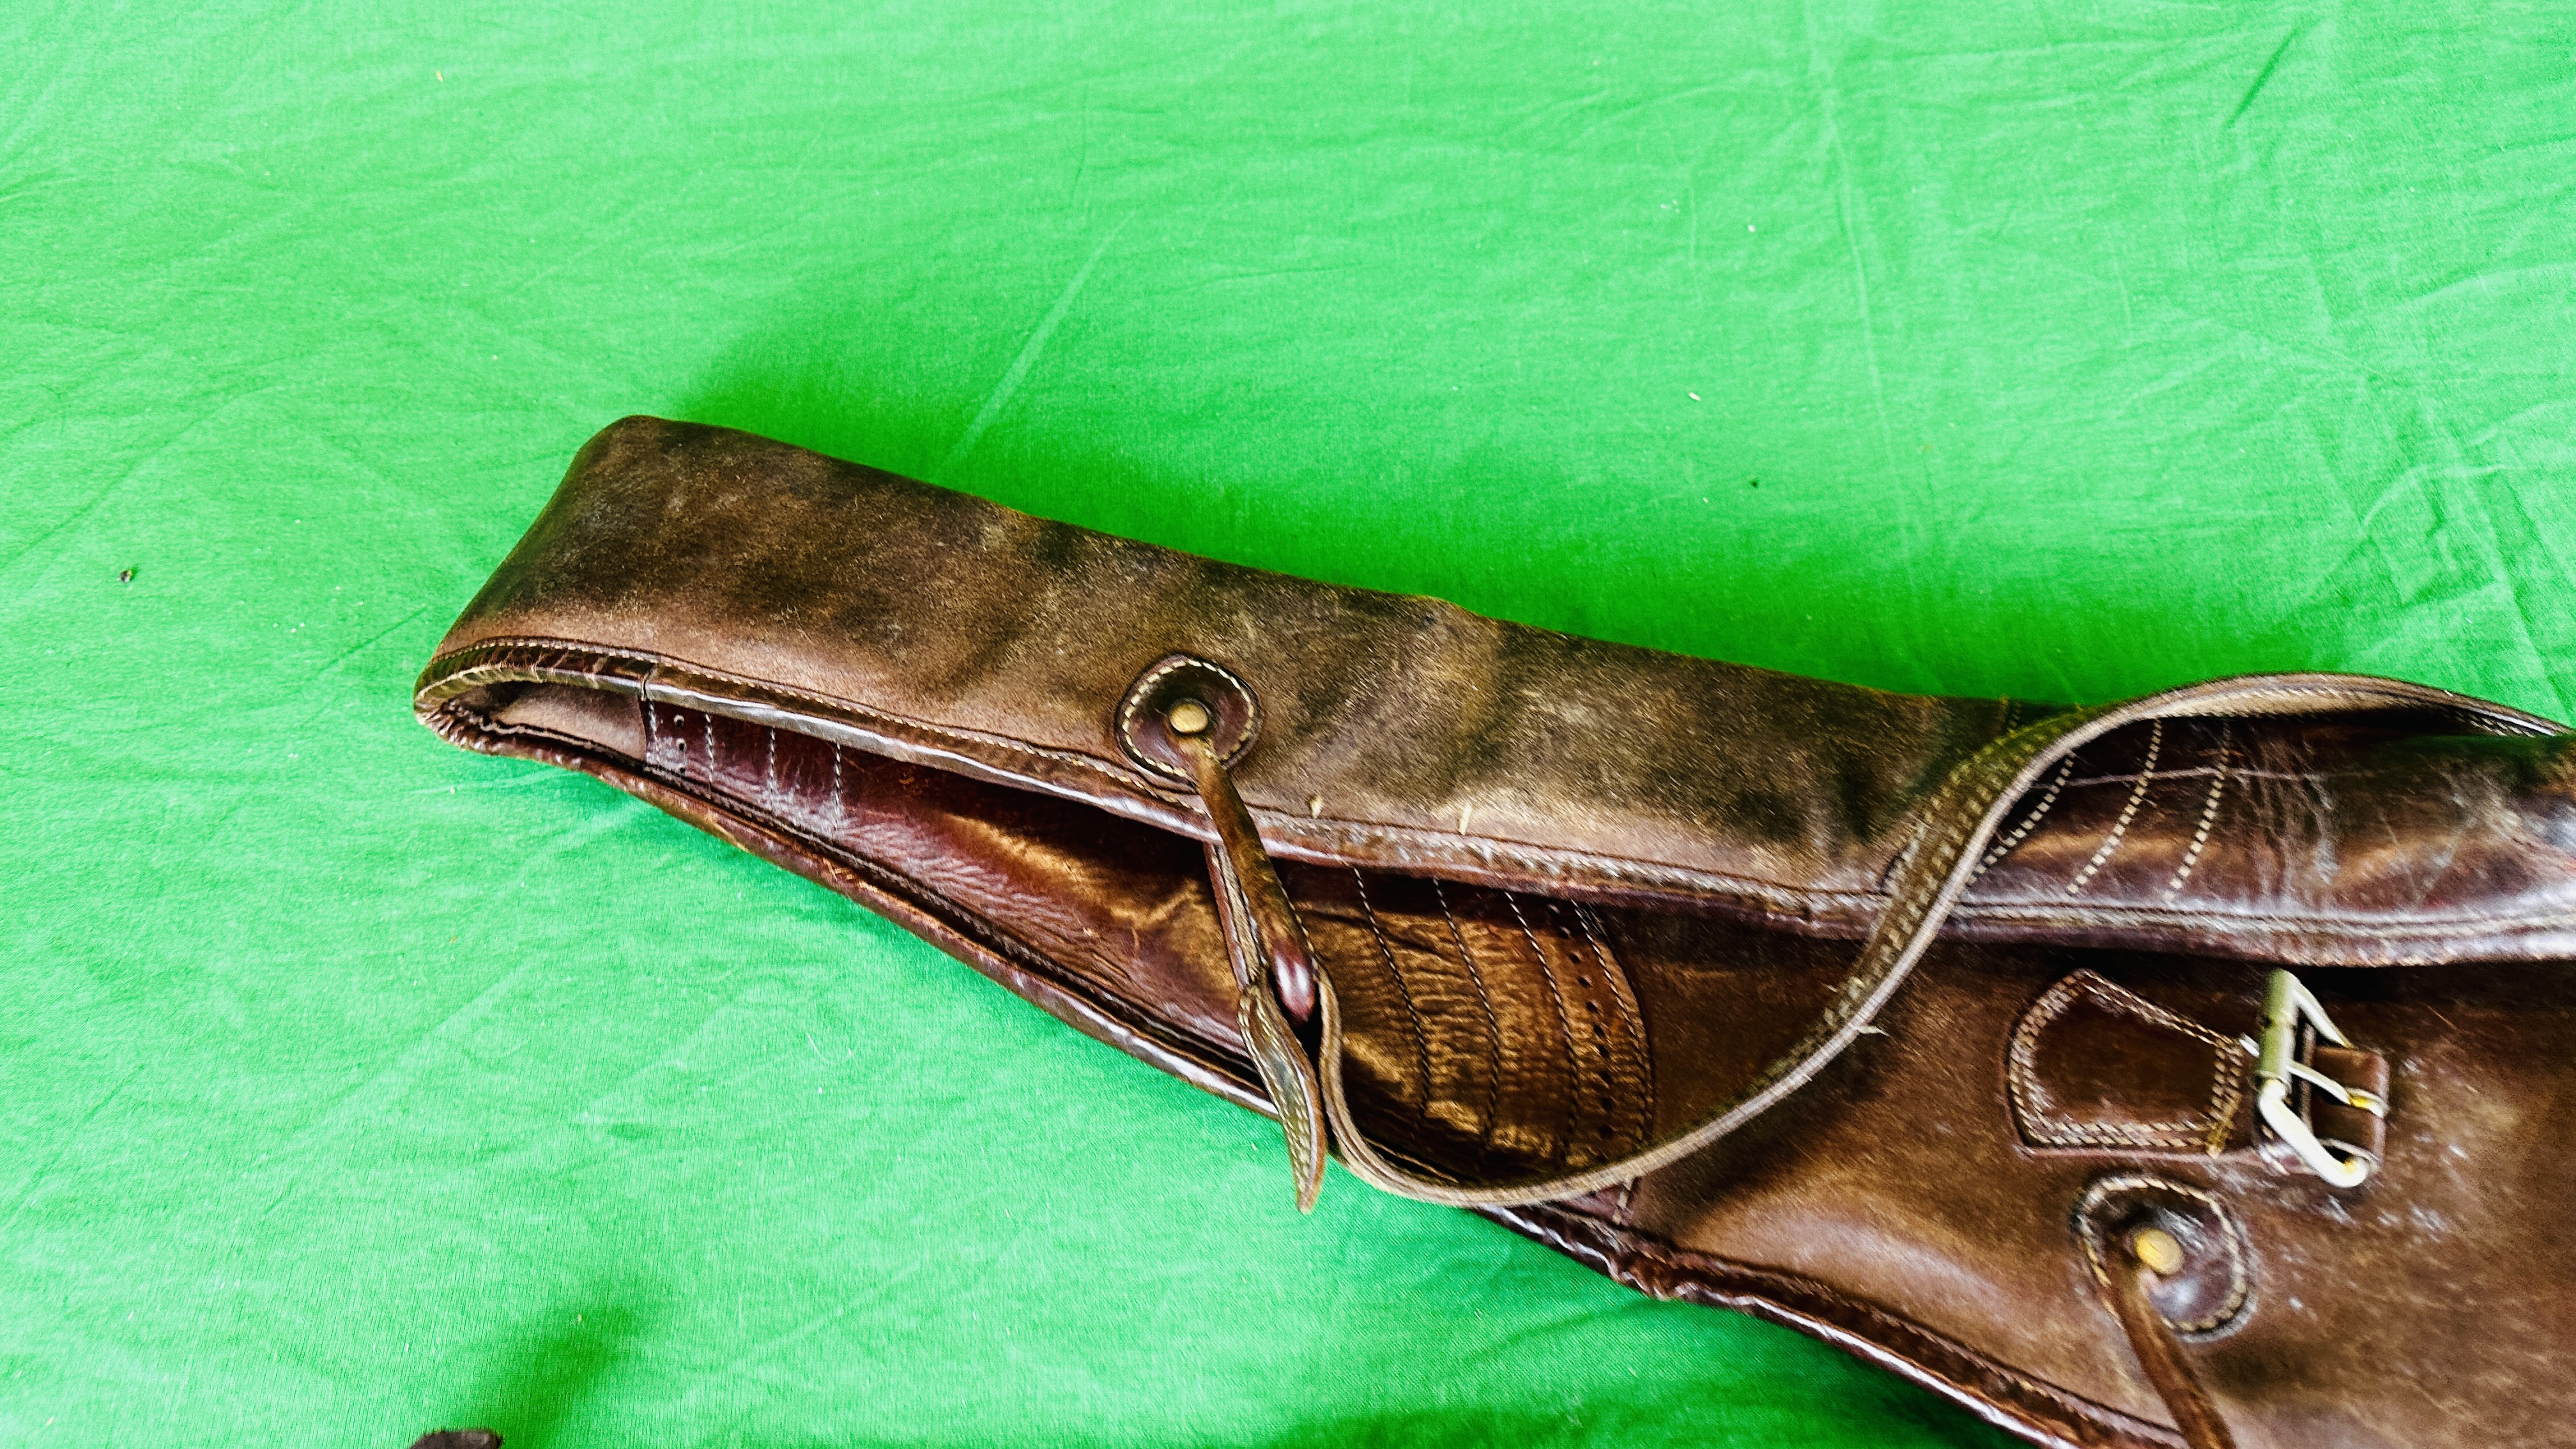 PAIR LEATHER GAITERS, LEATHER SHOTGUN SLIP AND TAN LEATHER FLASK HOLDER. - Image 7 of 10